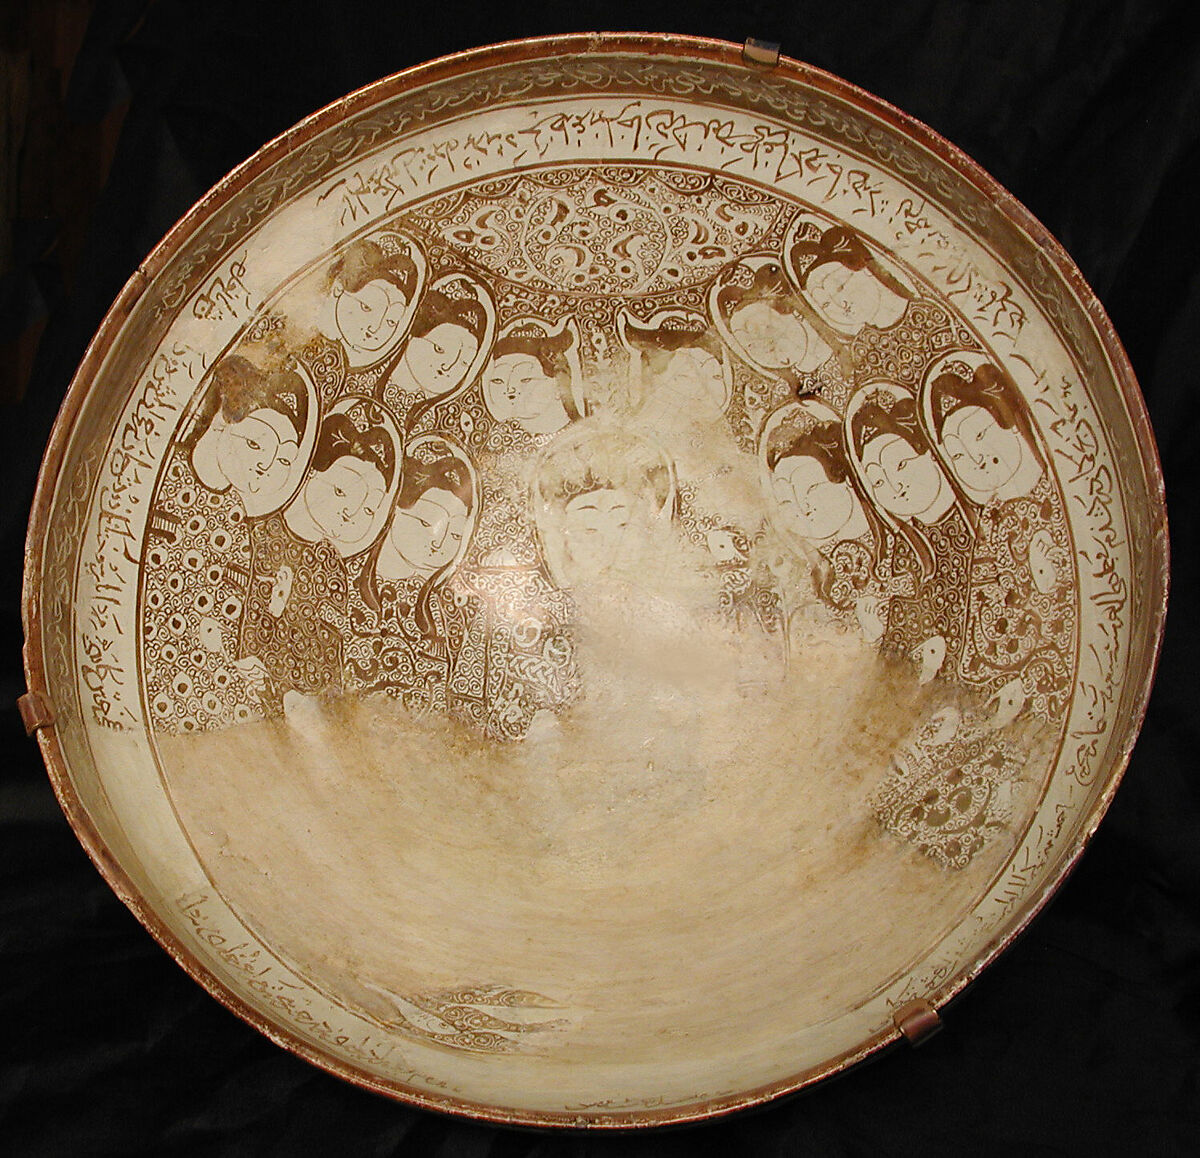 Bowl, Stonepaste; luster-painted on opaque white glaze